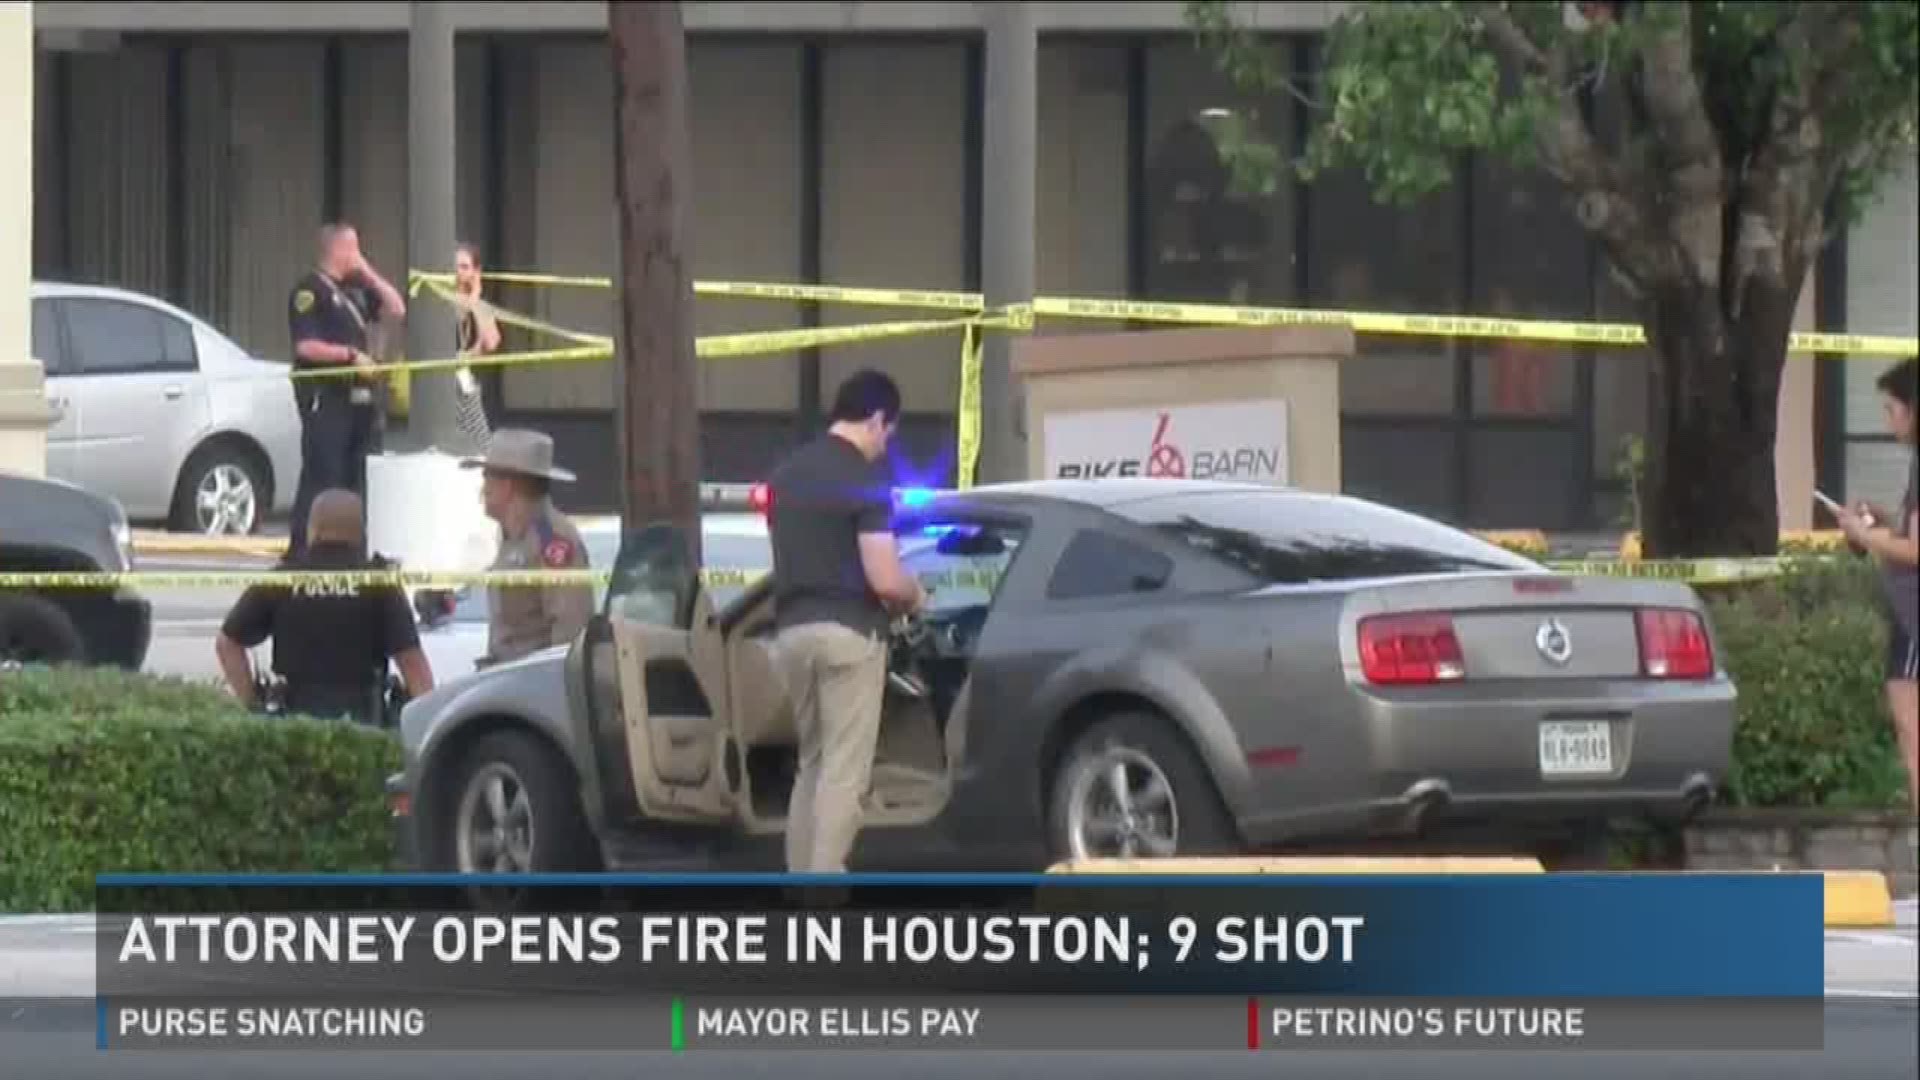 Attorney opens fire in Houston; 9 shot